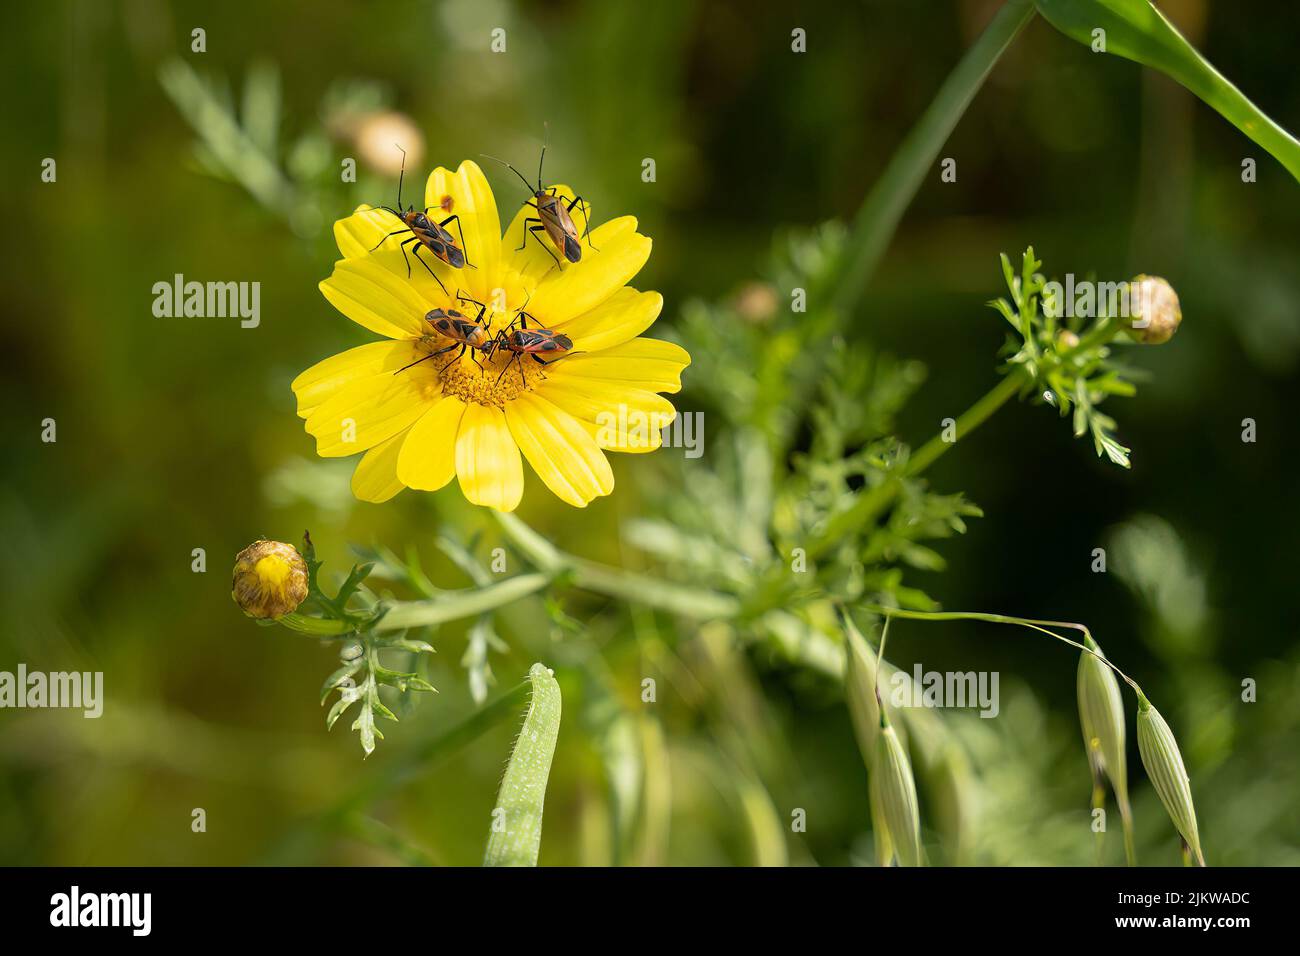 Four firebugs on a single crown daisy flower on a spring day in Israel. Stock Photo